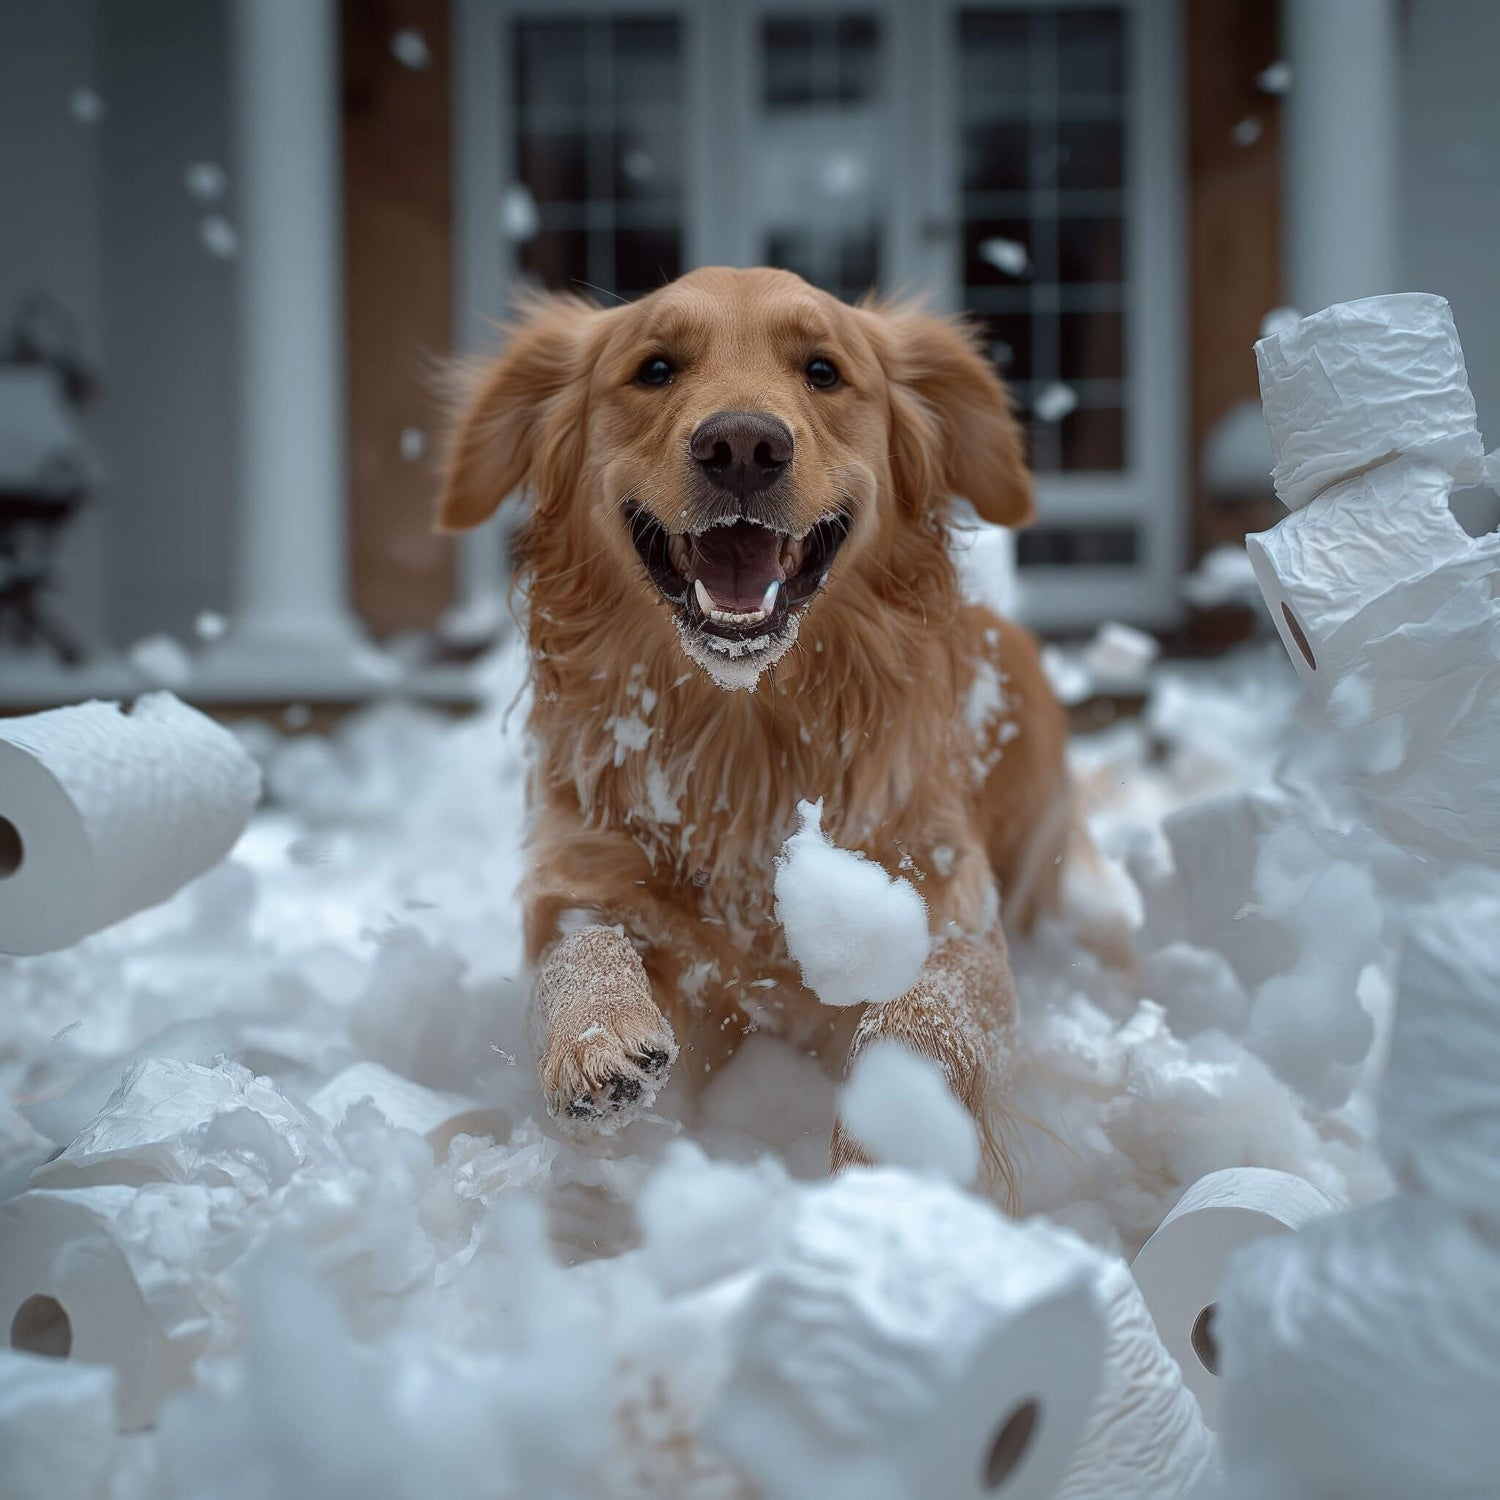 Golden retriever jumping into a pile of toilet paper